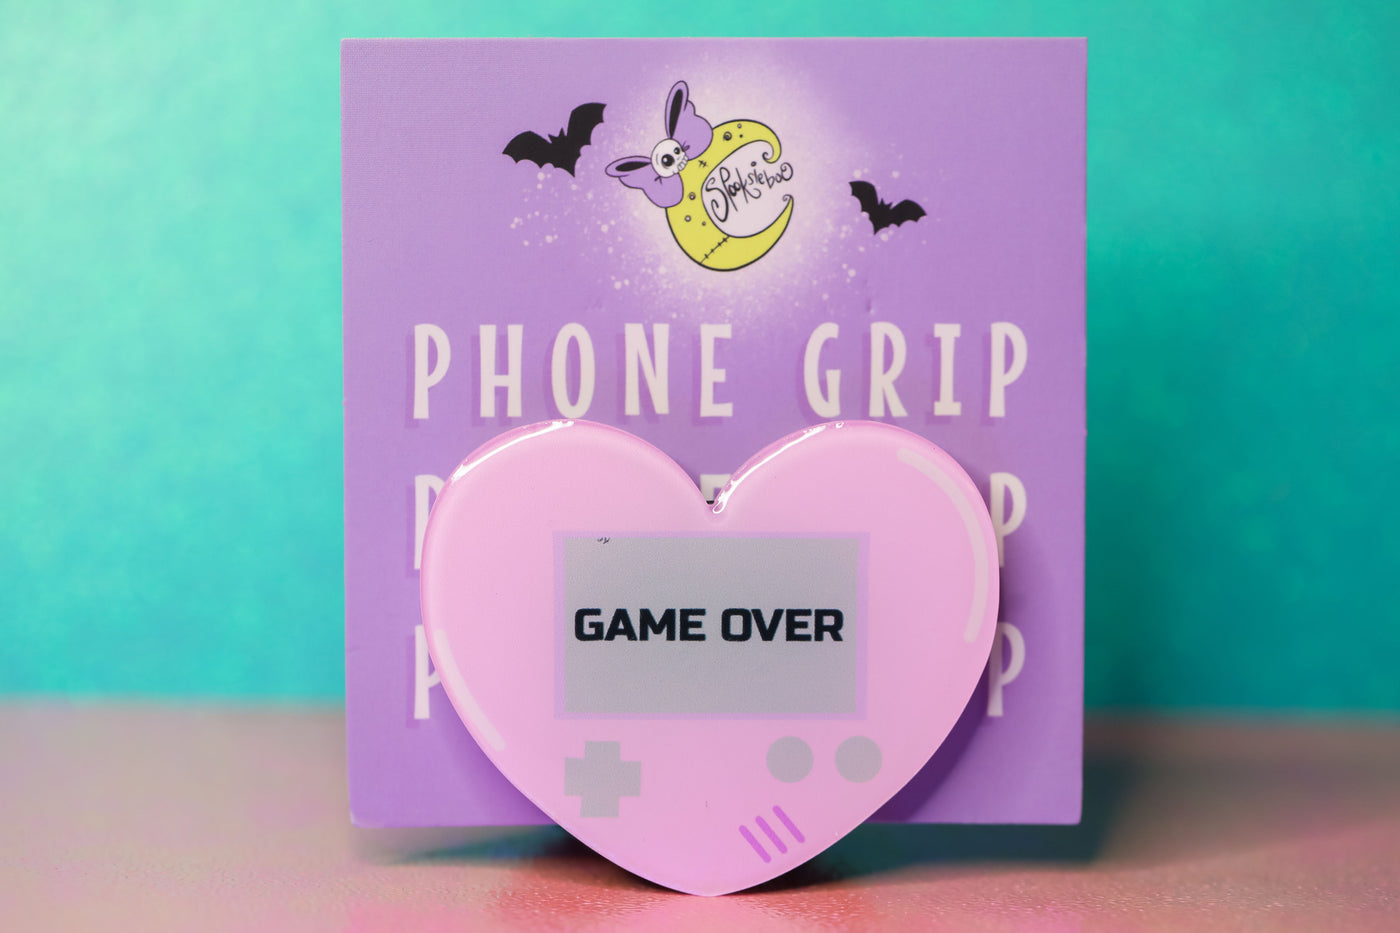 Heart Game Over Phone Grip